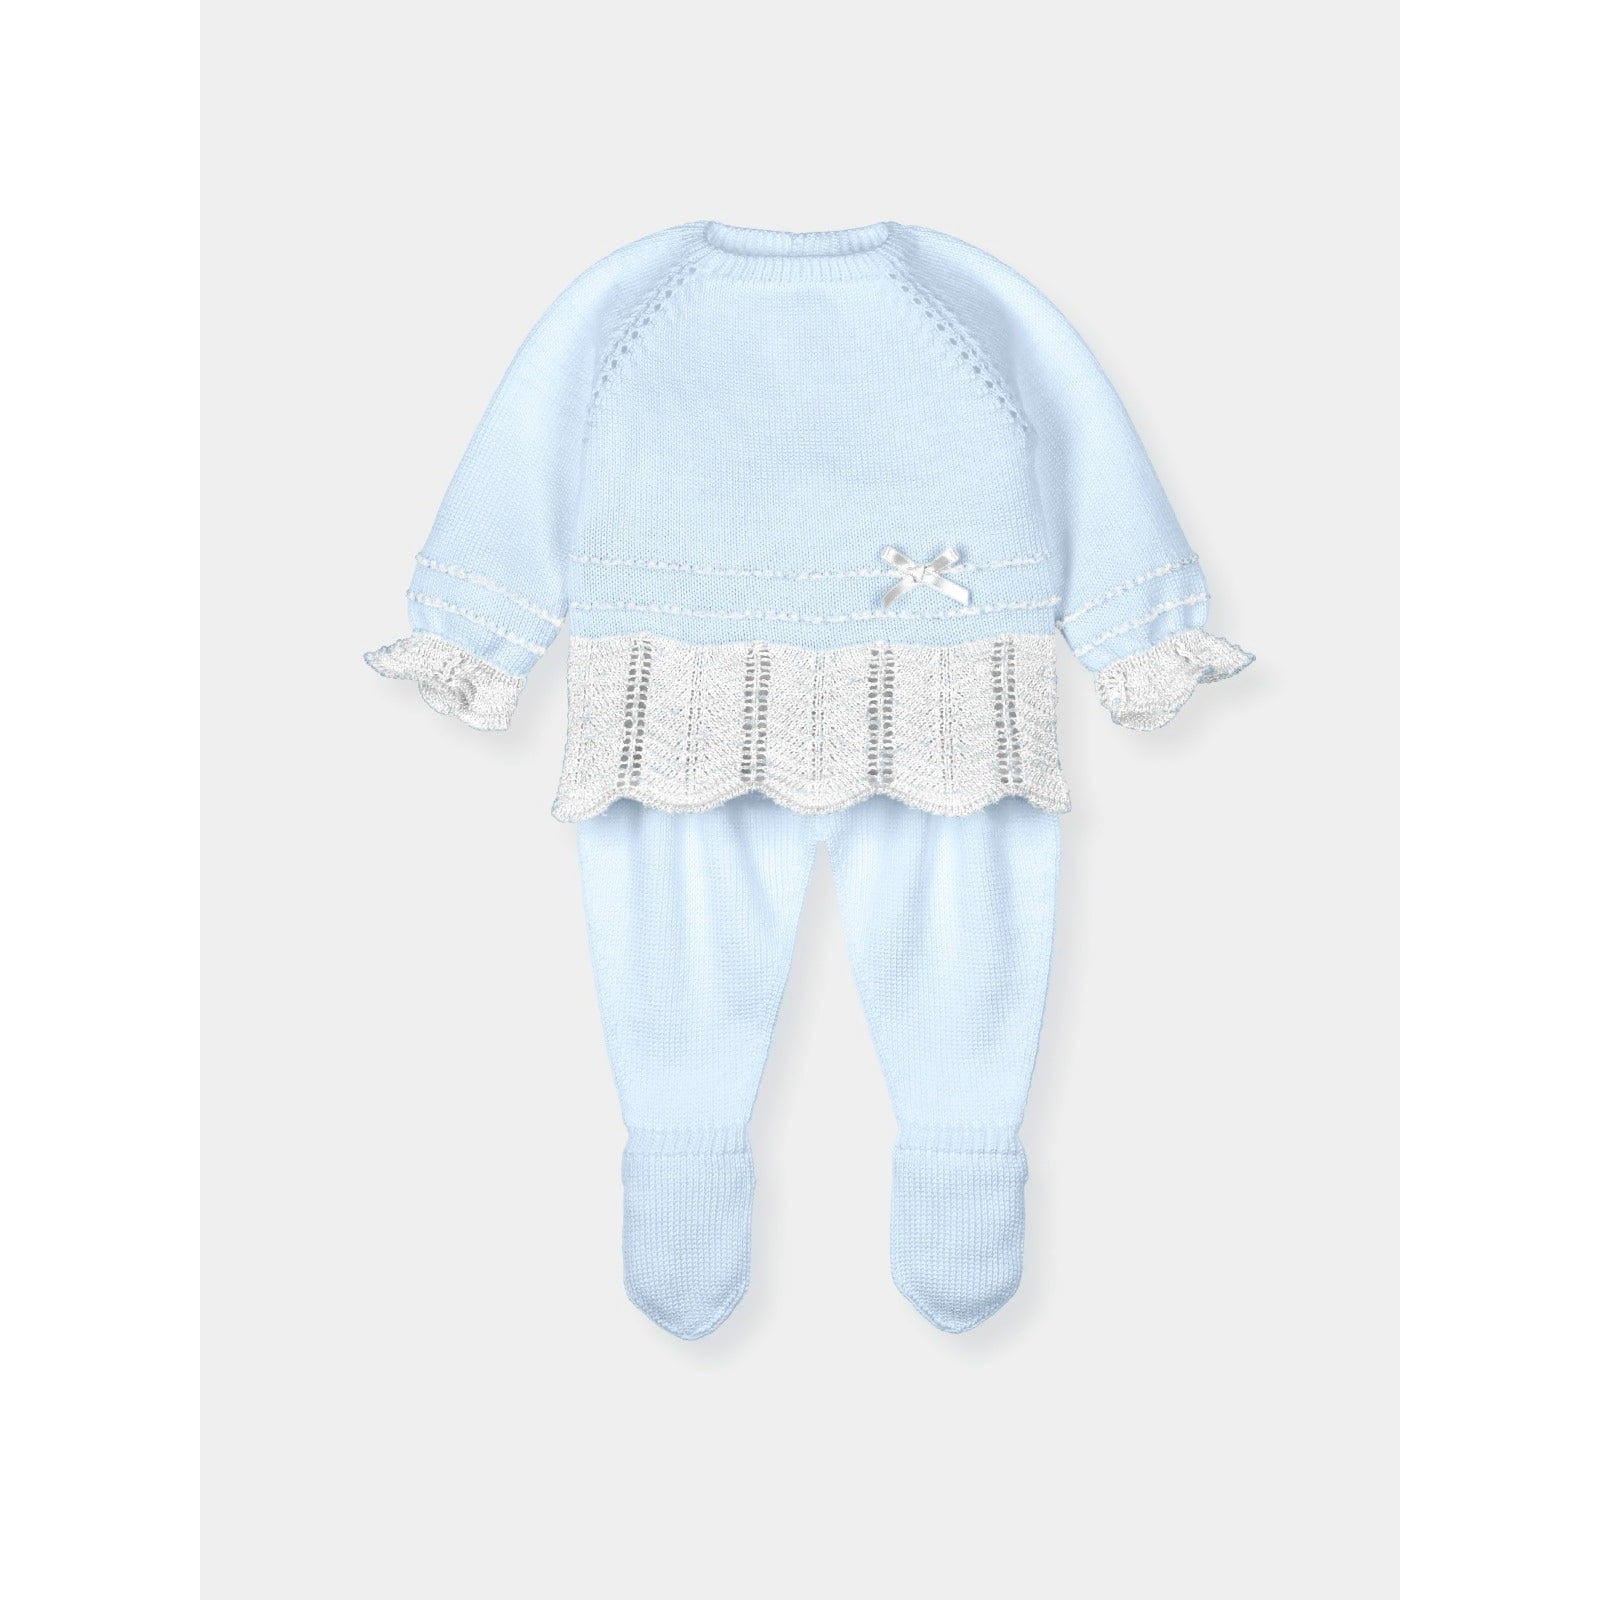 Mac Ilusion Mac Ilusion Baby Cte/Bco Knitted Sweater With Leggins Helenium Outfit